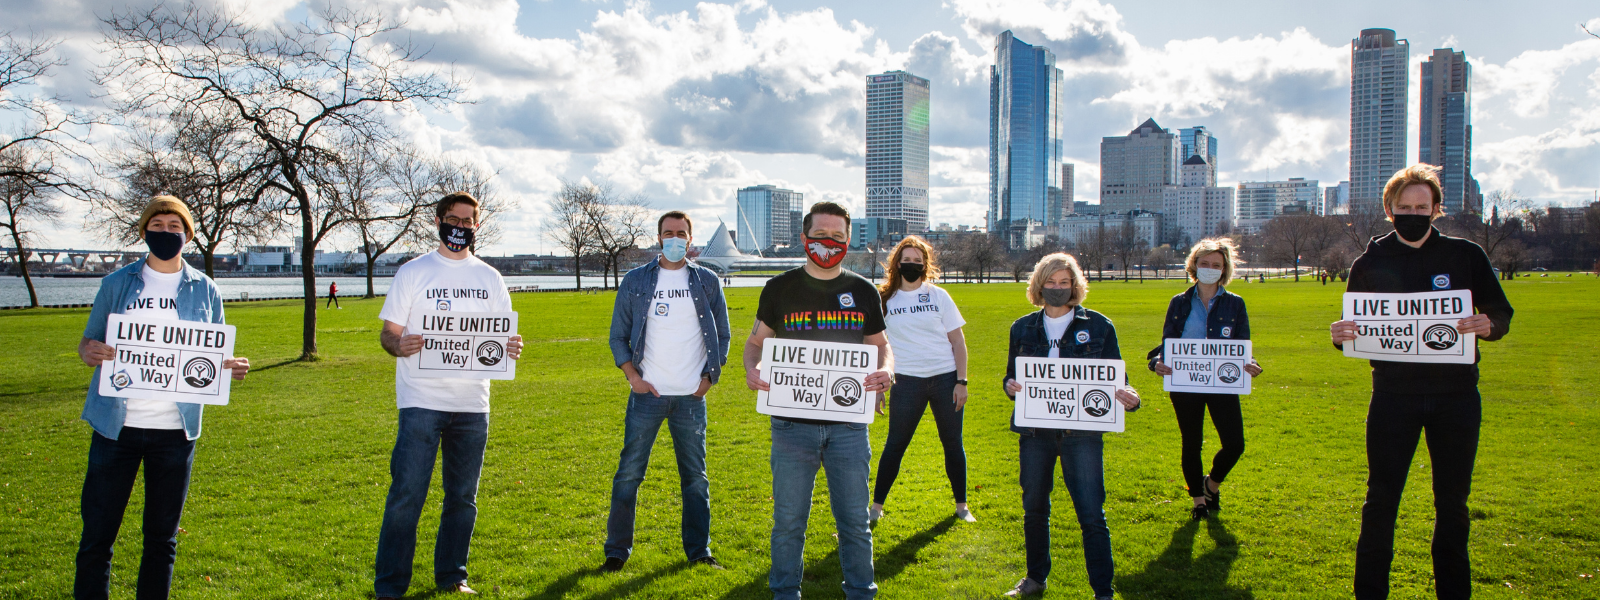 LINC members holding Live United signs outside with the Milwaukee skyline in the background.